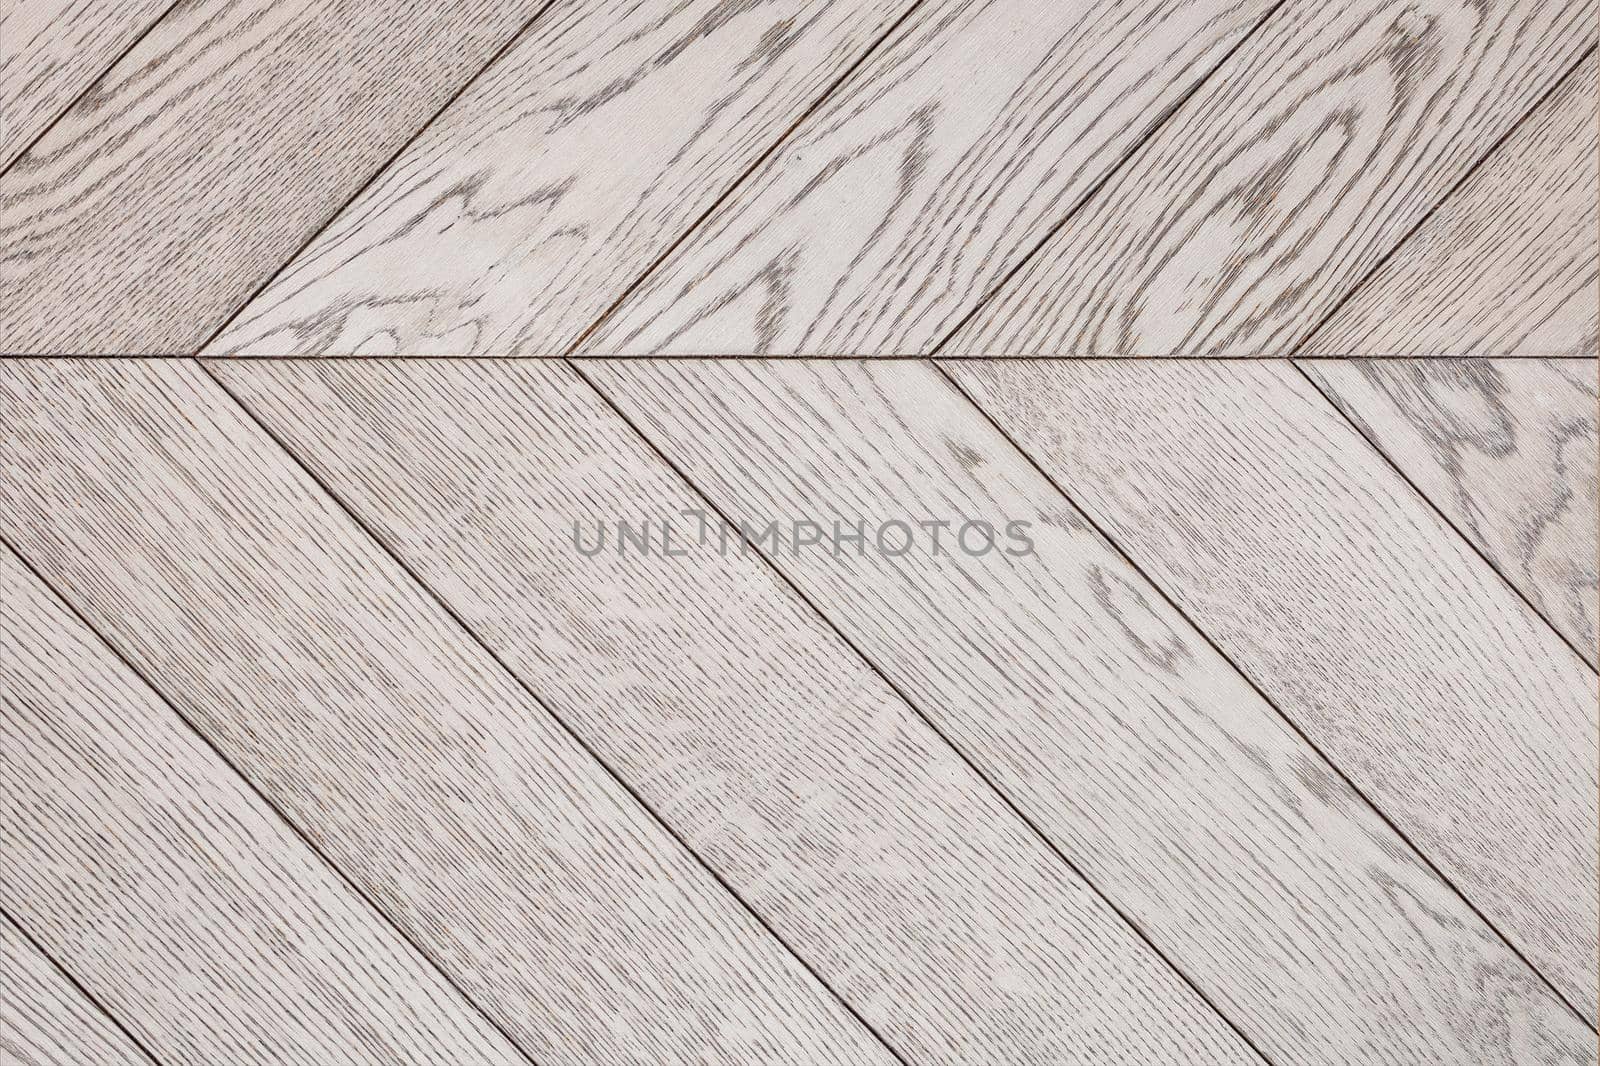 Light wood planks with a expressive gray texture are neatly stacked side by side.